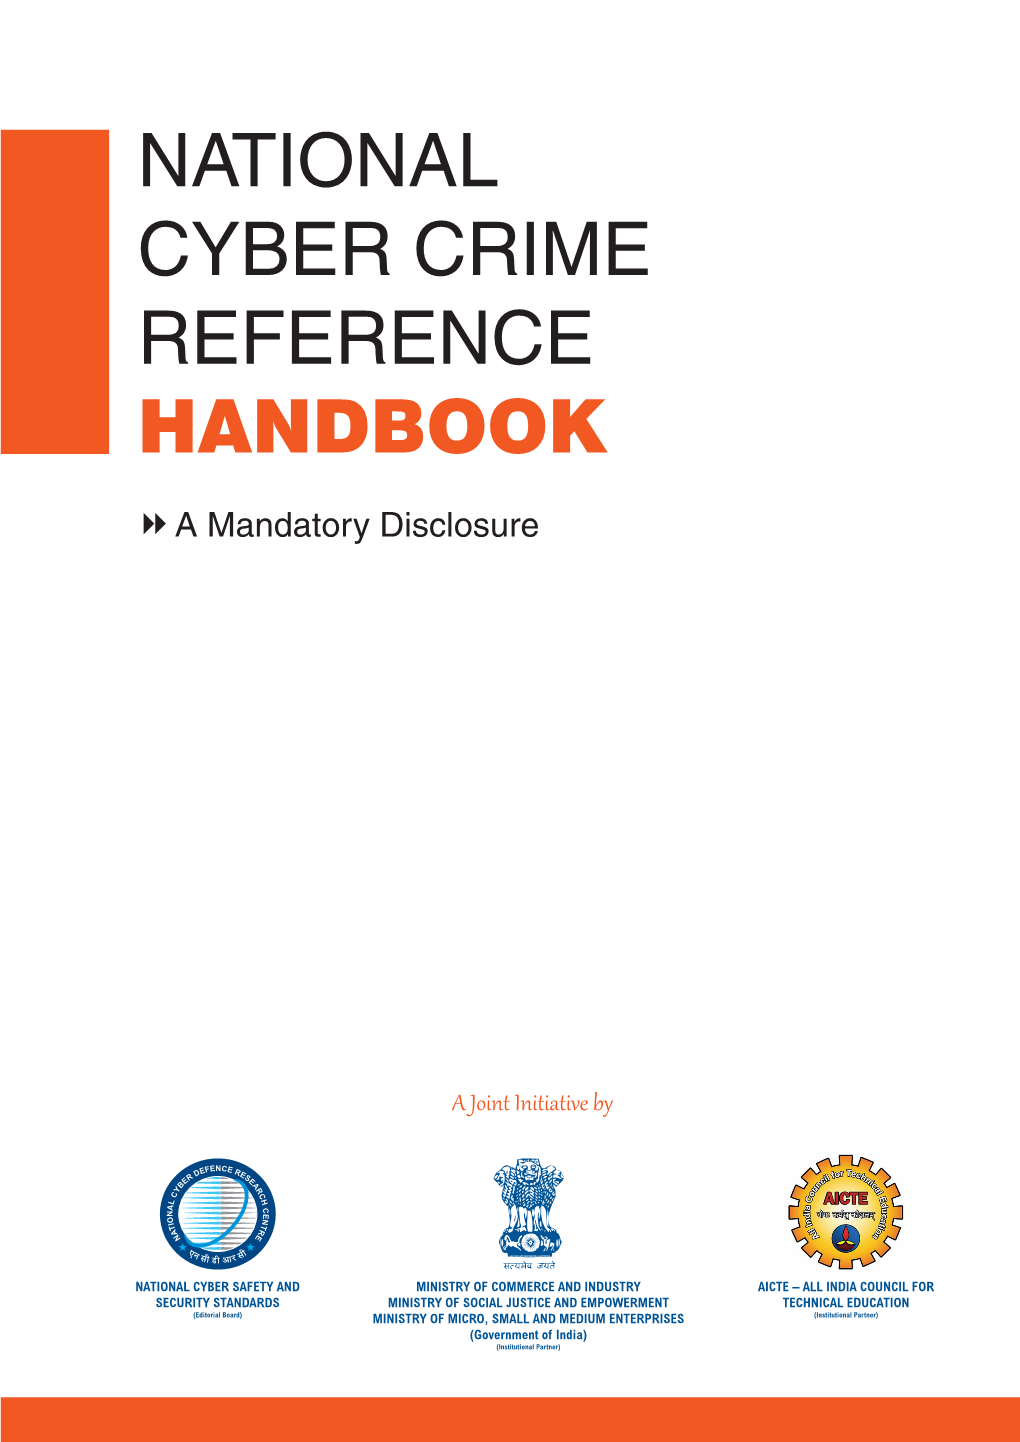 NATIONAL Cyber Crime REFERENCE HANDBOOK